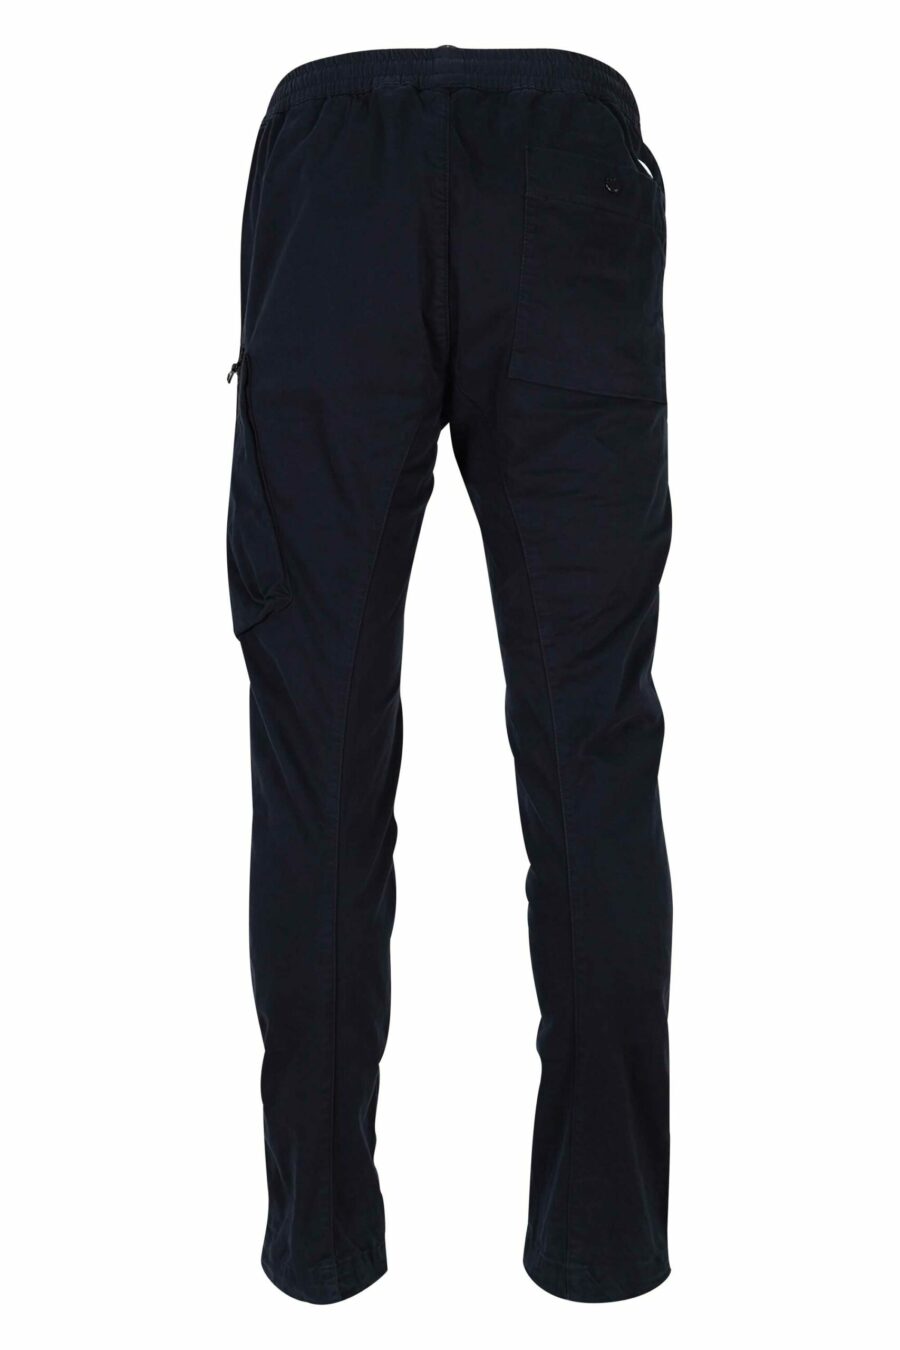 Dark blue stretch satin trousers with side pocket and logo lens - 7620943578485 2 1 scaled